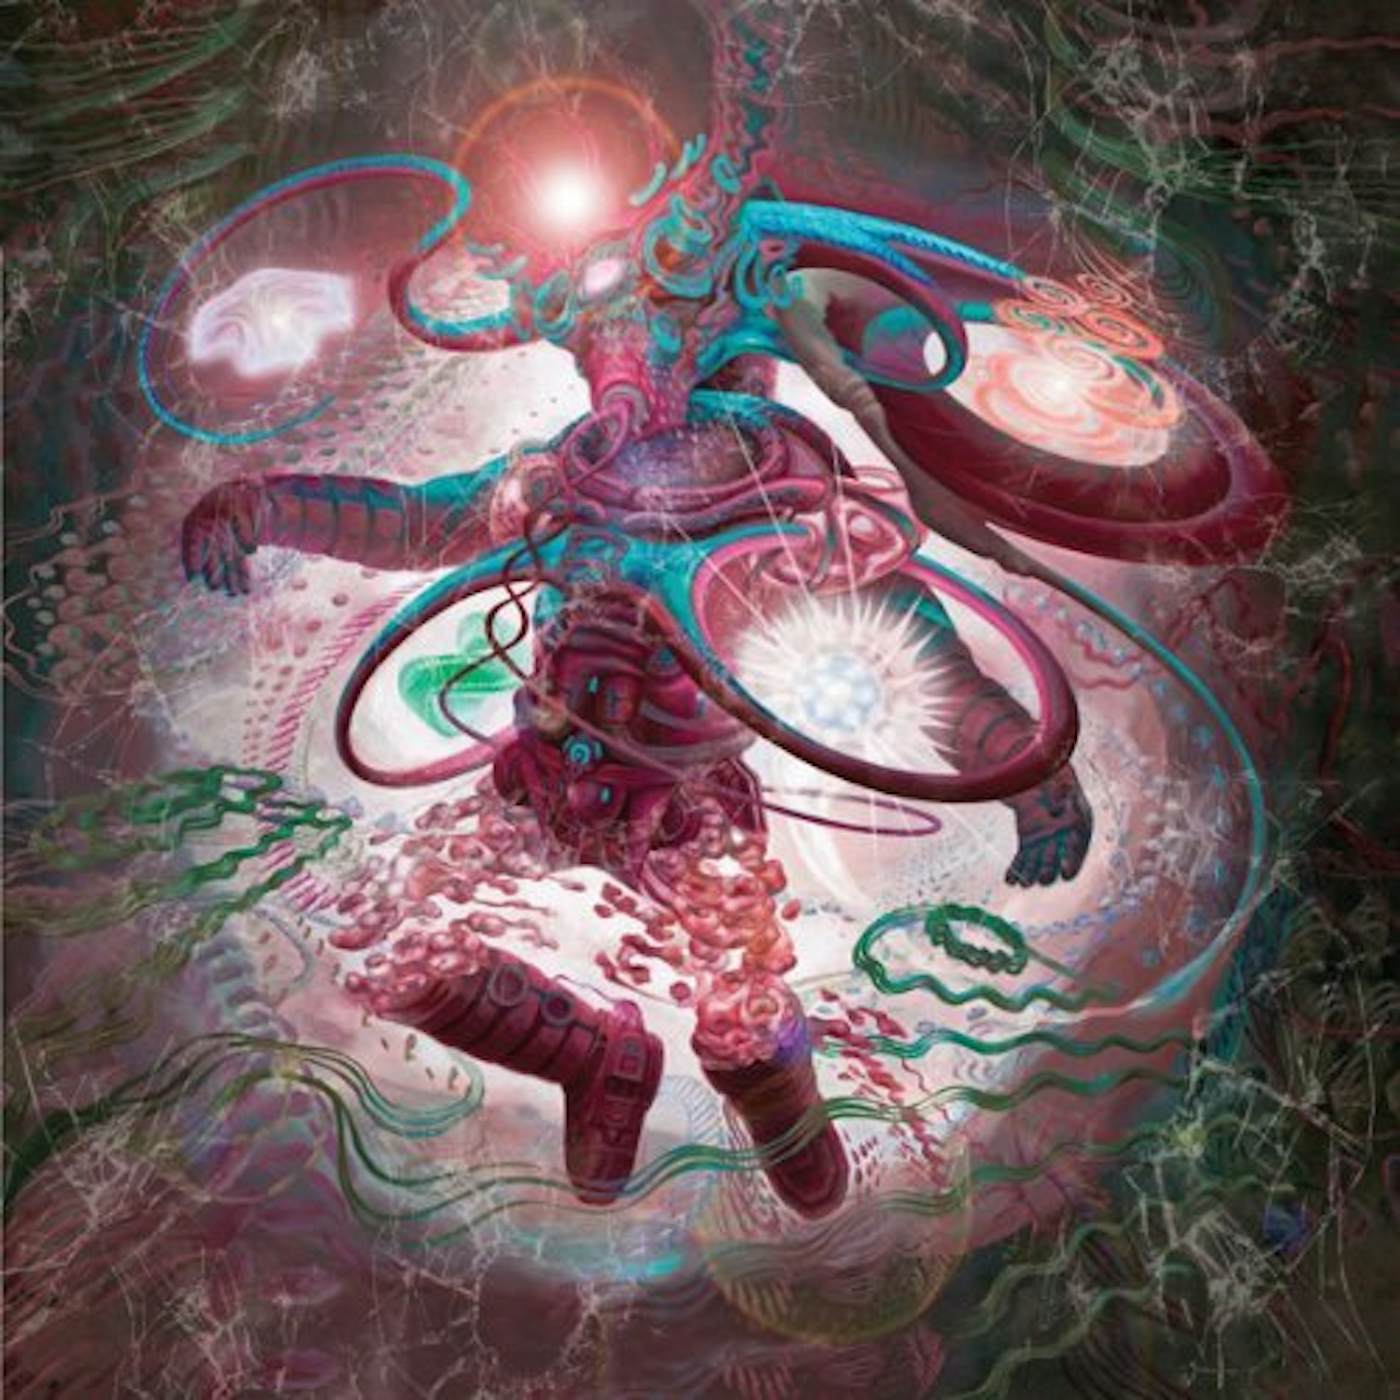 Coheed and Cambria AFTERMAN: DESCENSION: DELUXE CD